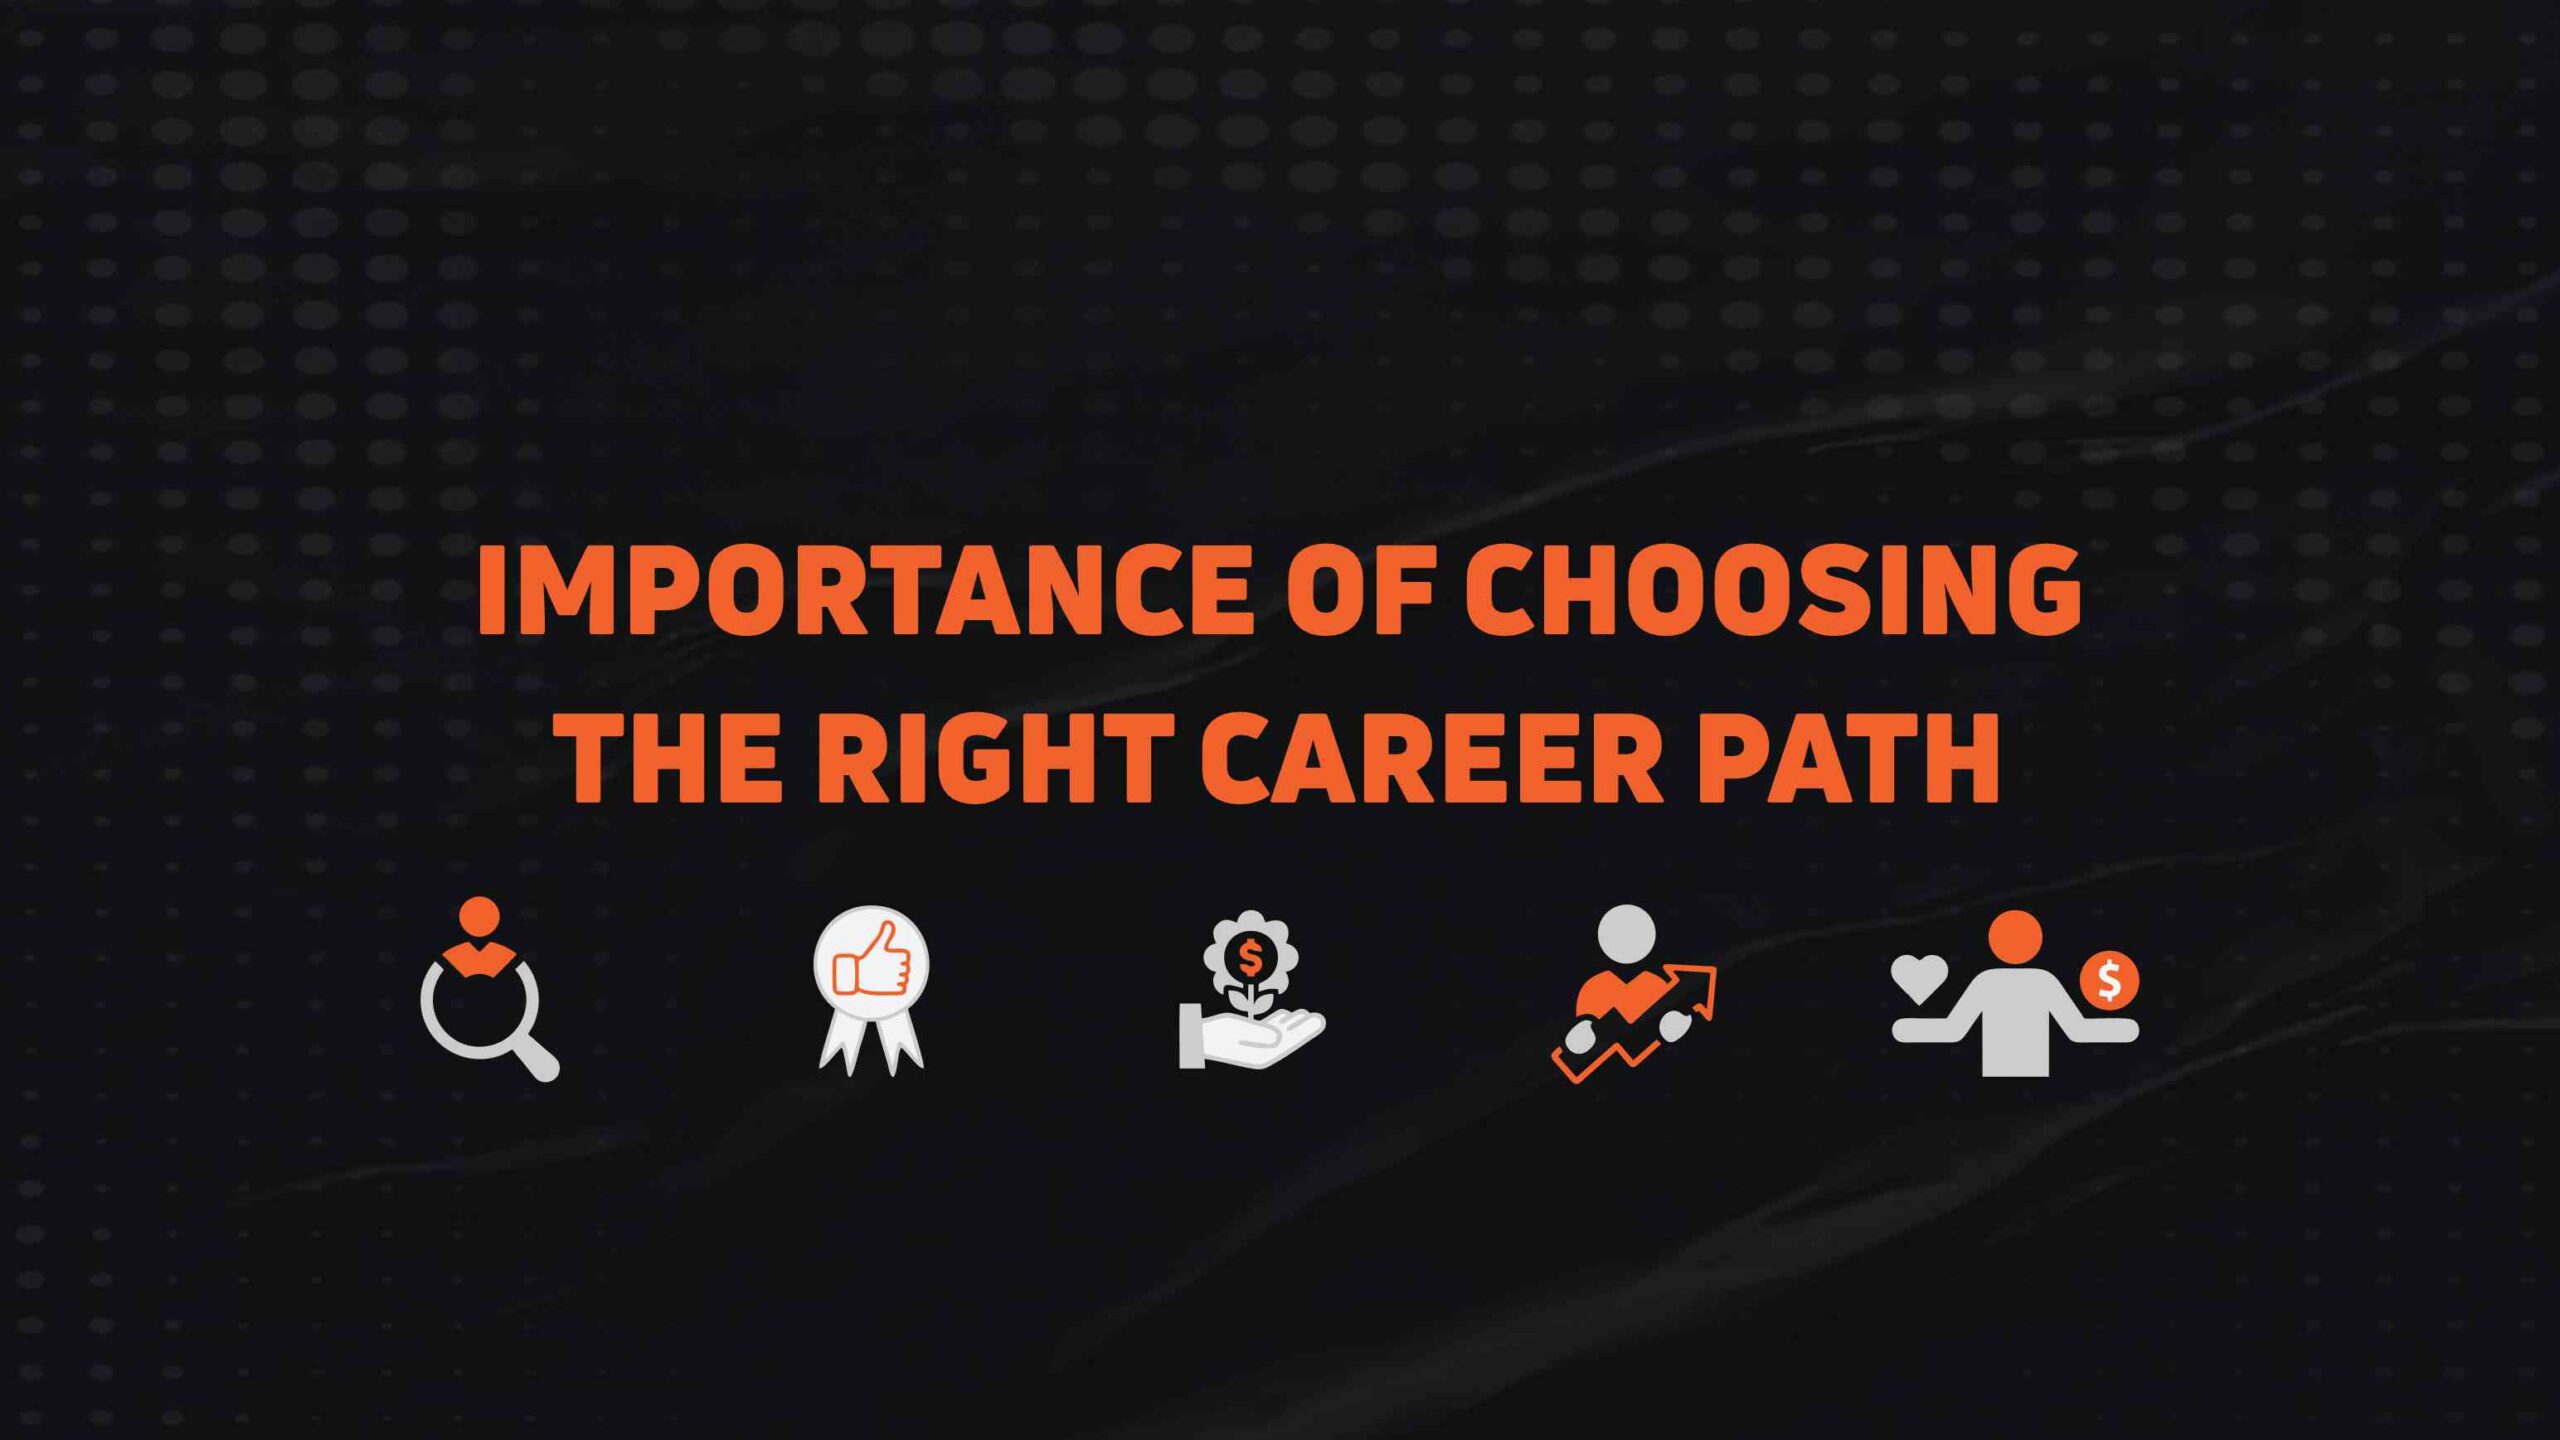 Importance of Choosing the Right Career Path